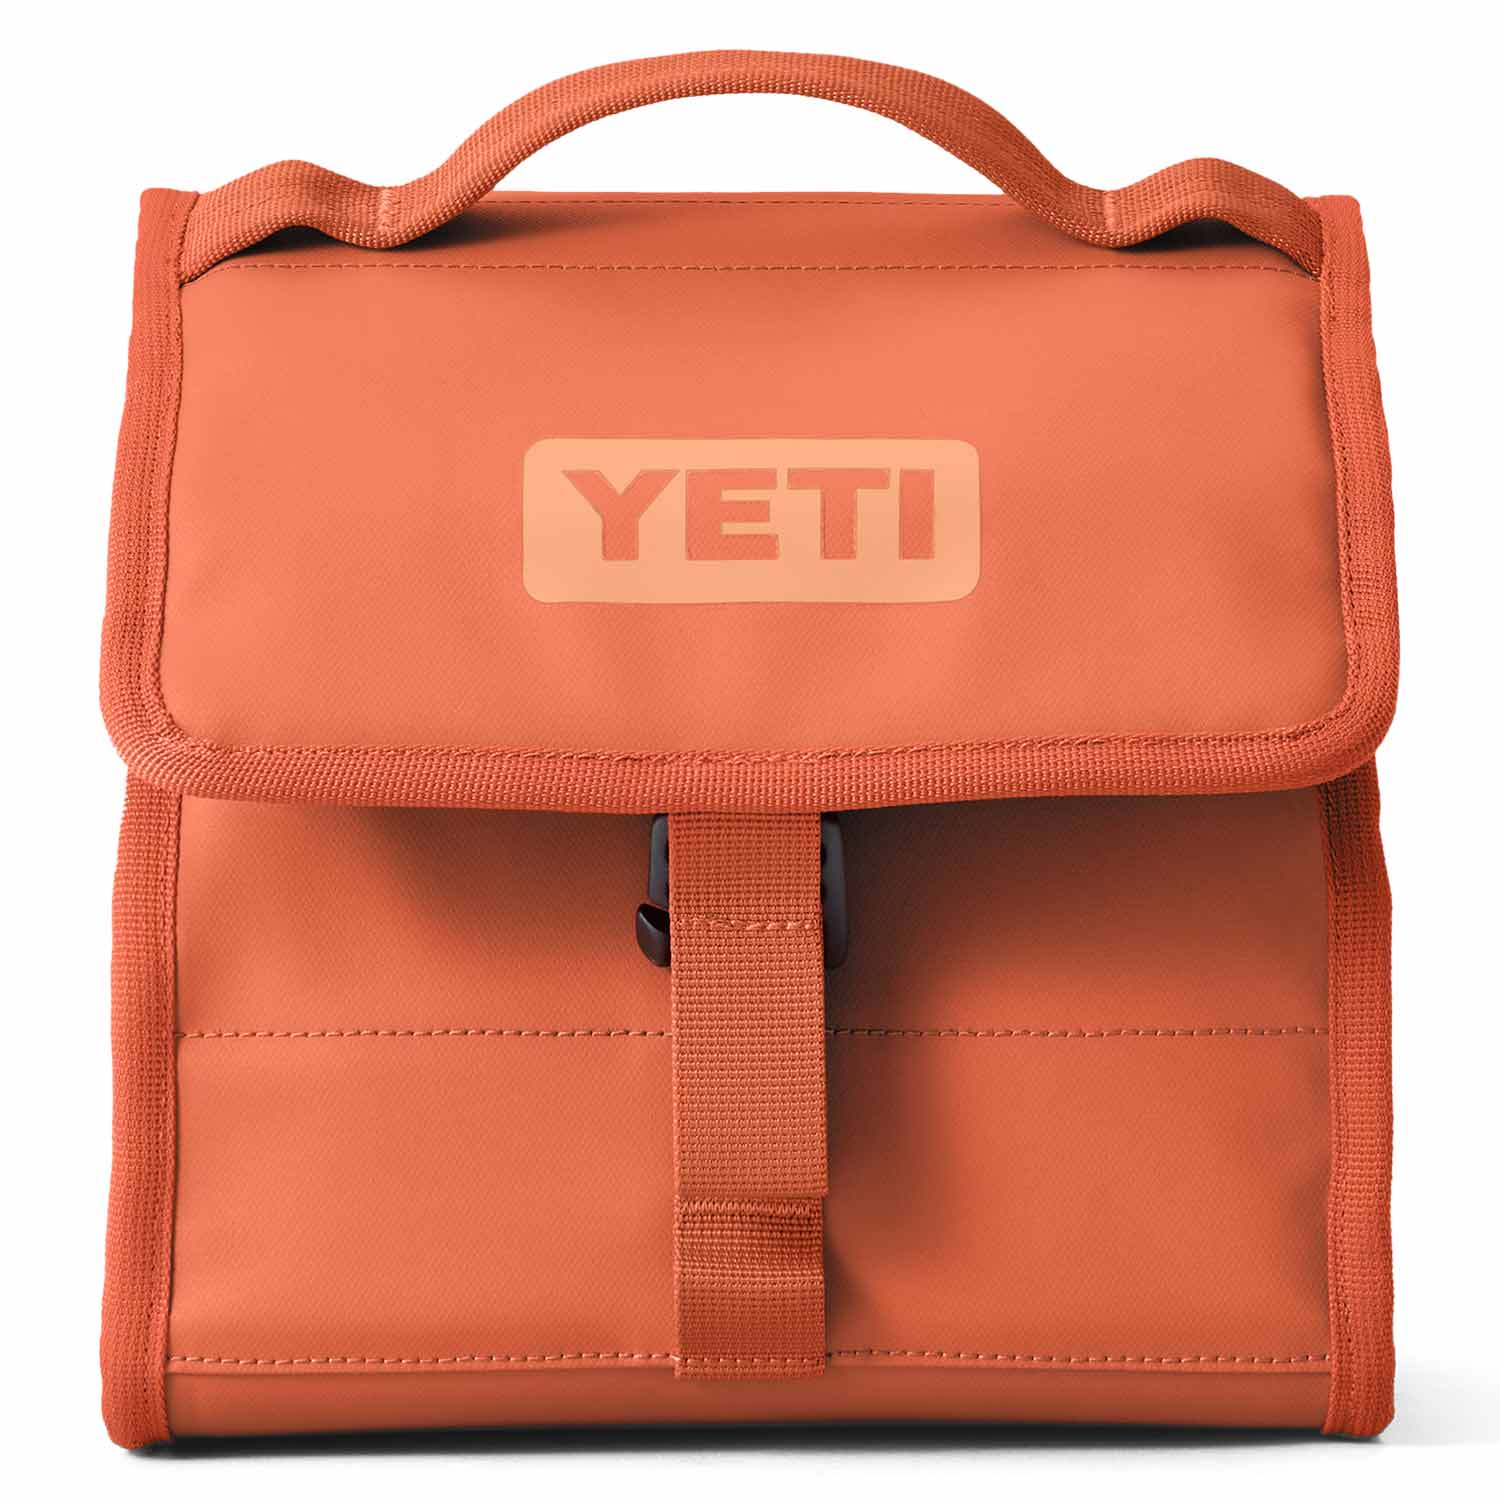 YETI Daytrip Lunch Bag keeps food and drink cold for hours and has